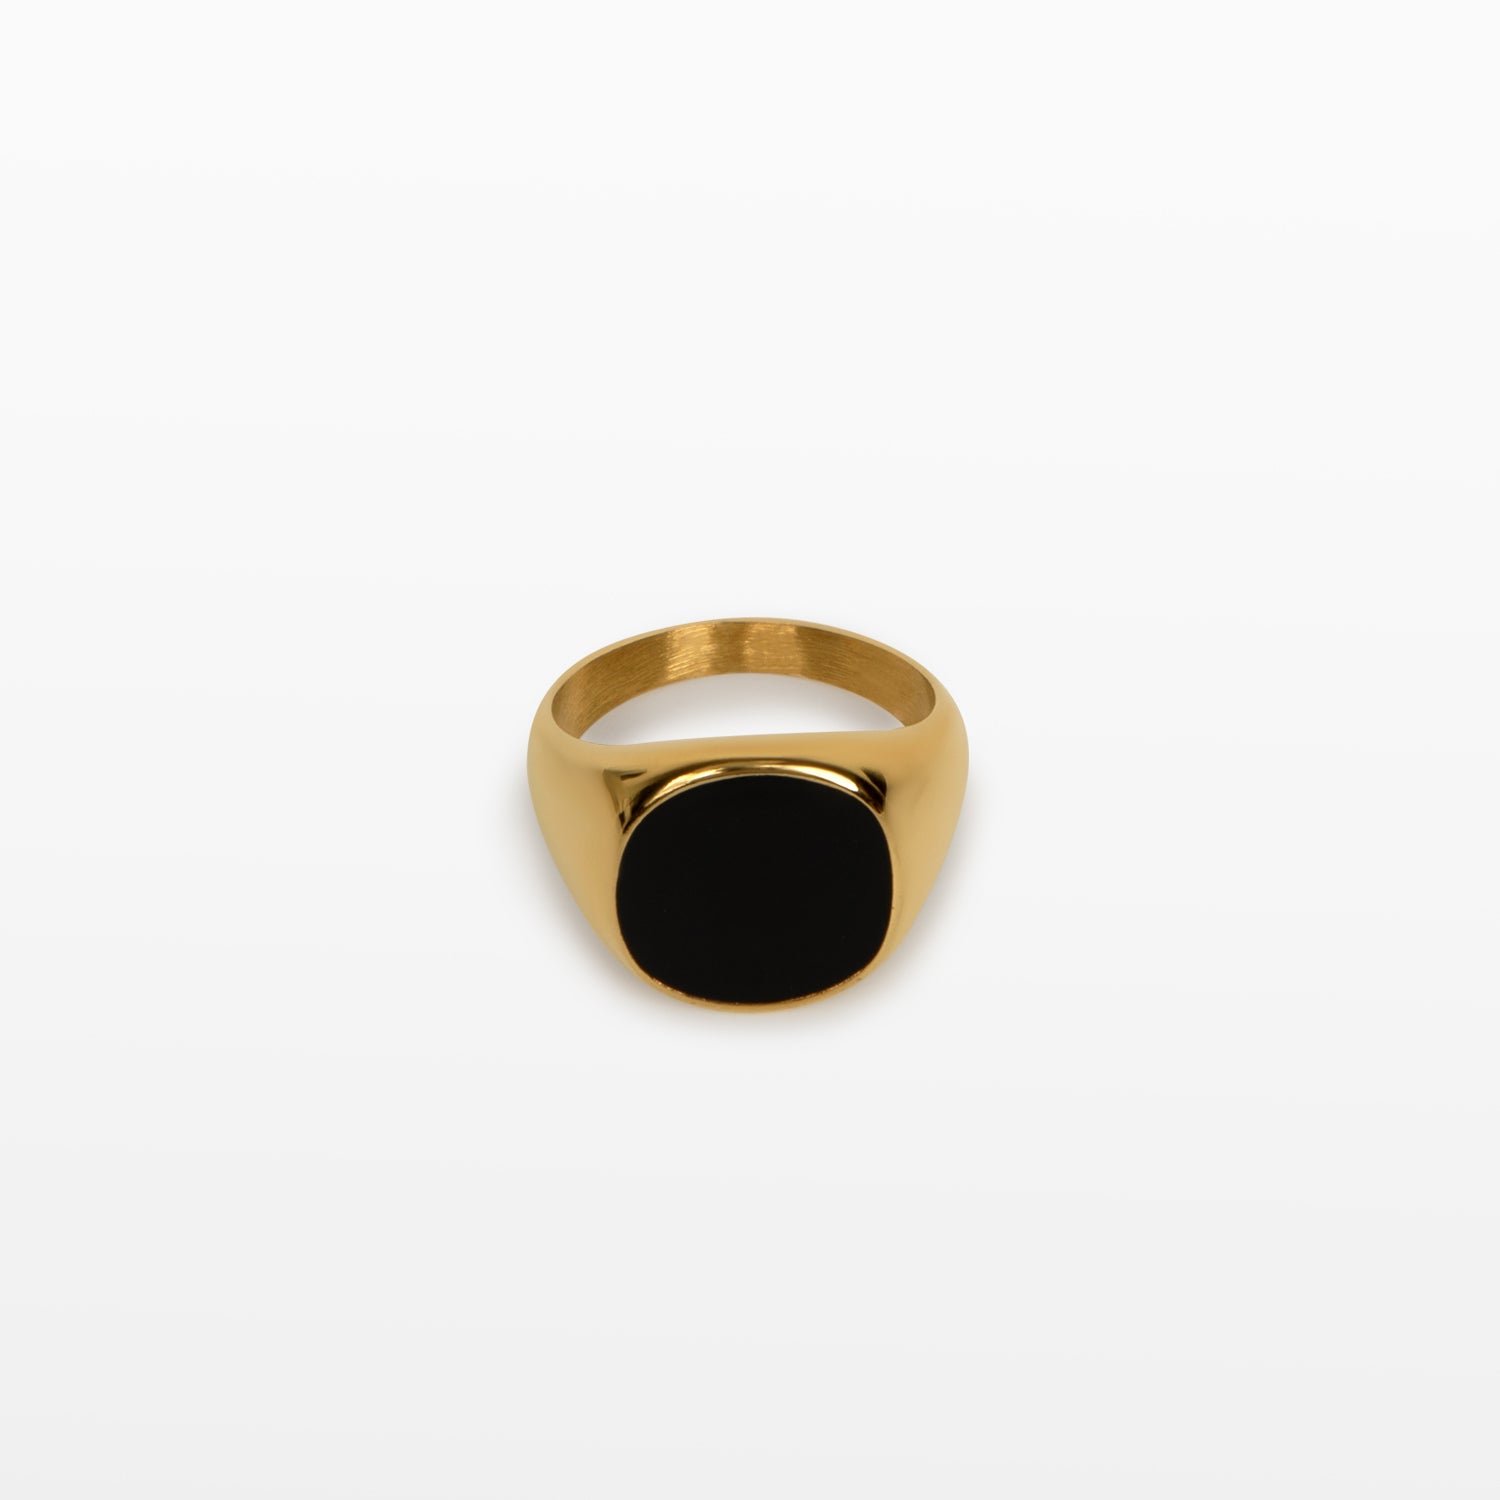 Image of the Black Signet Ring is crafted with 18K Gold Plating, which is resistant to tarnishing and water damage.